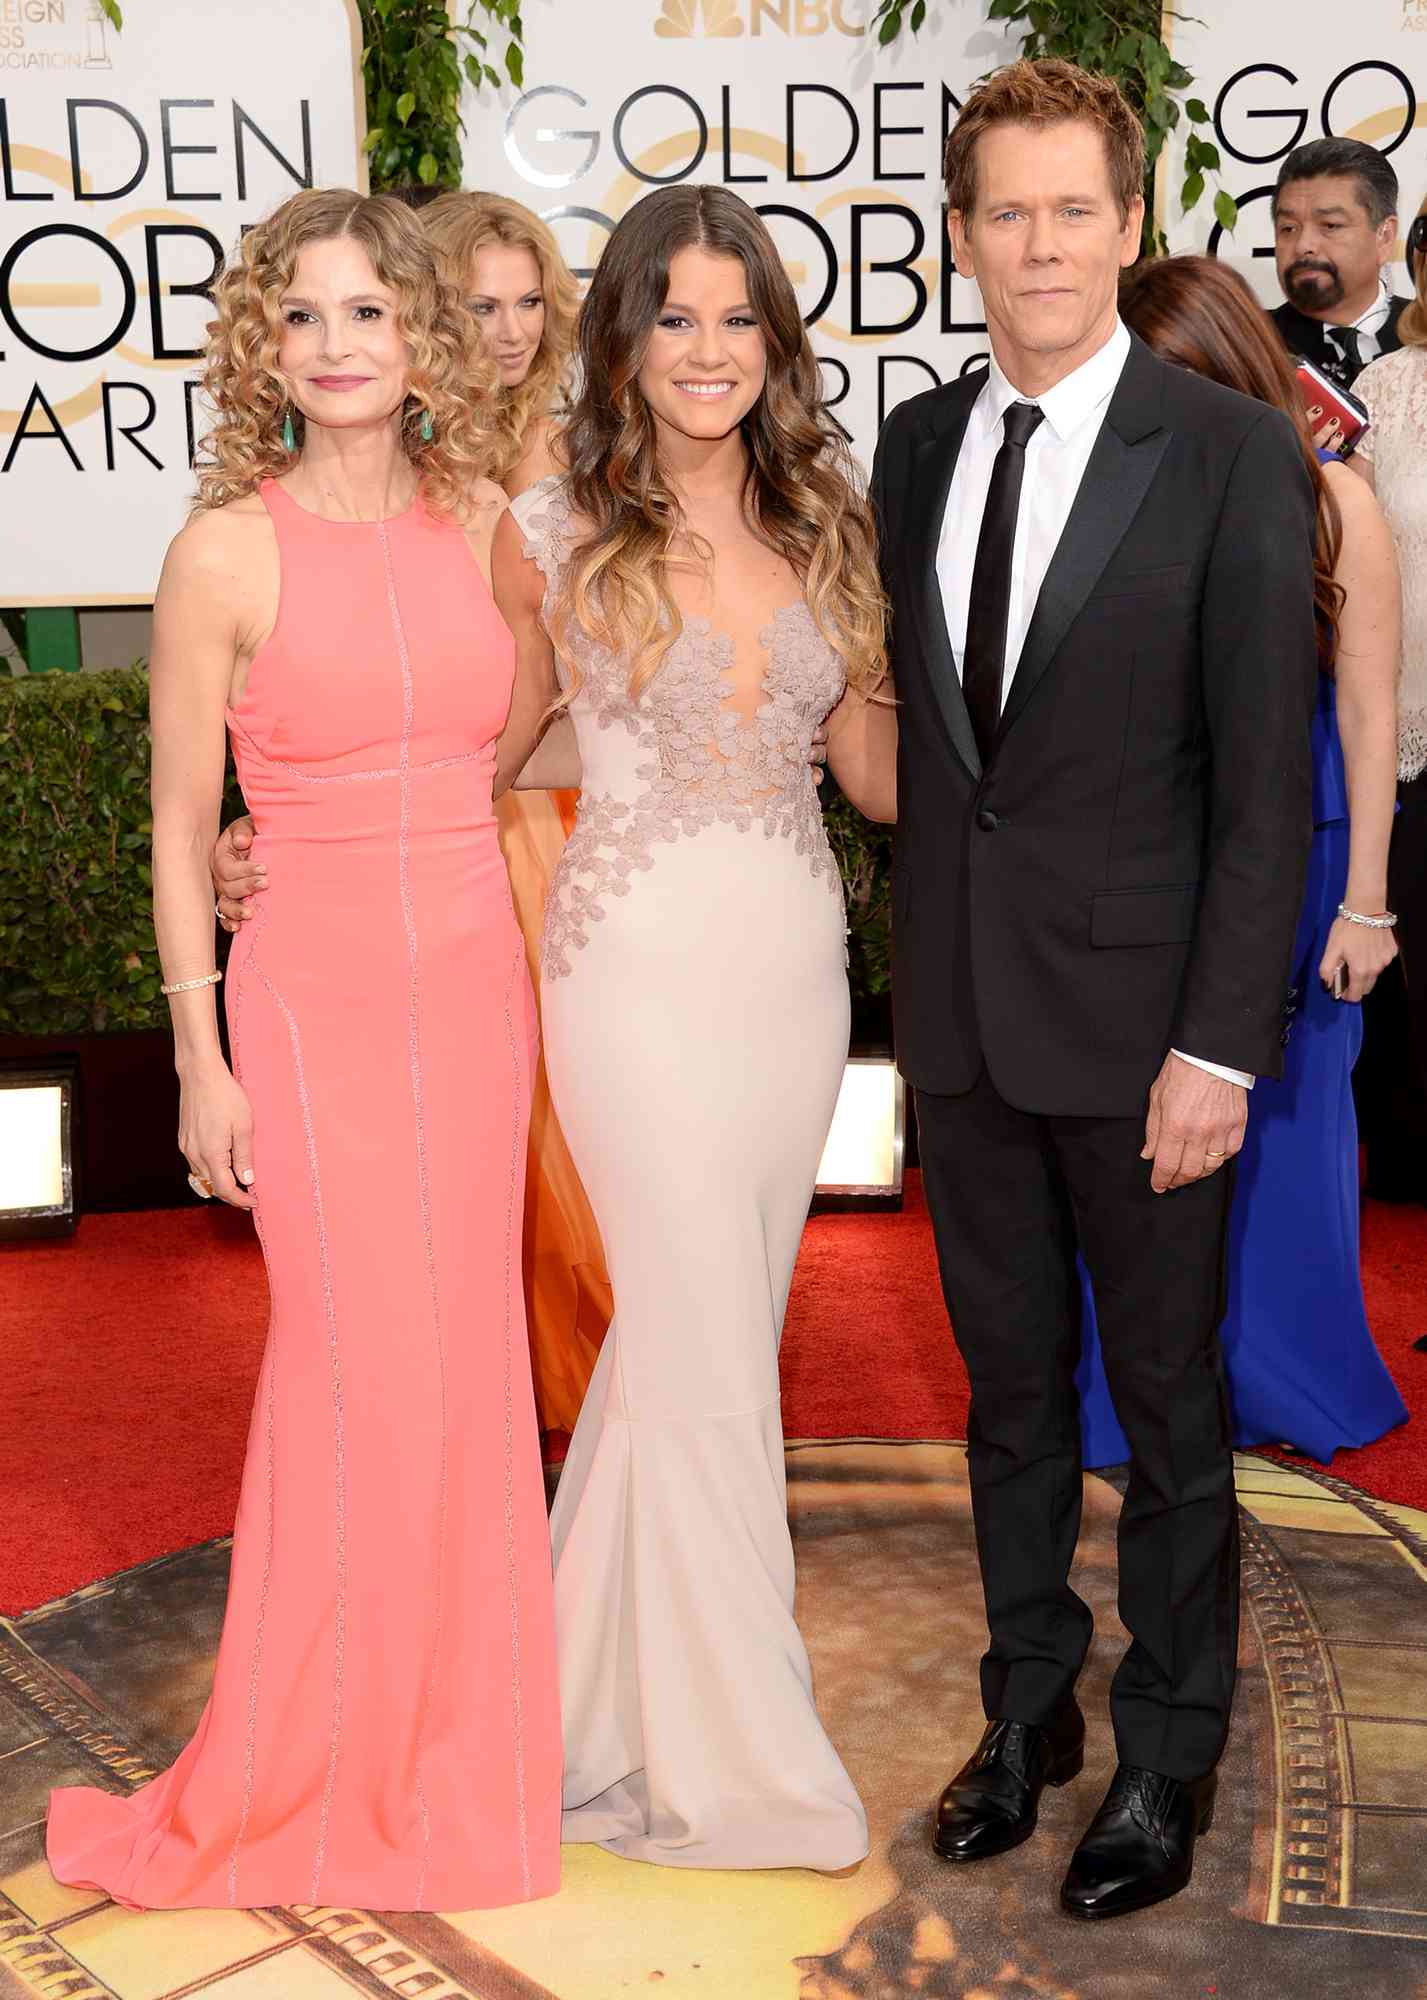 Kyra Sedgwick, Miss Golden Globe Sosie Bacon, and actor Kevin Bacon attend the 71st Annual Golden Globe Awards held at The Beverly Hilton Hotel on January 12, 2014 in Beverly Hills, California